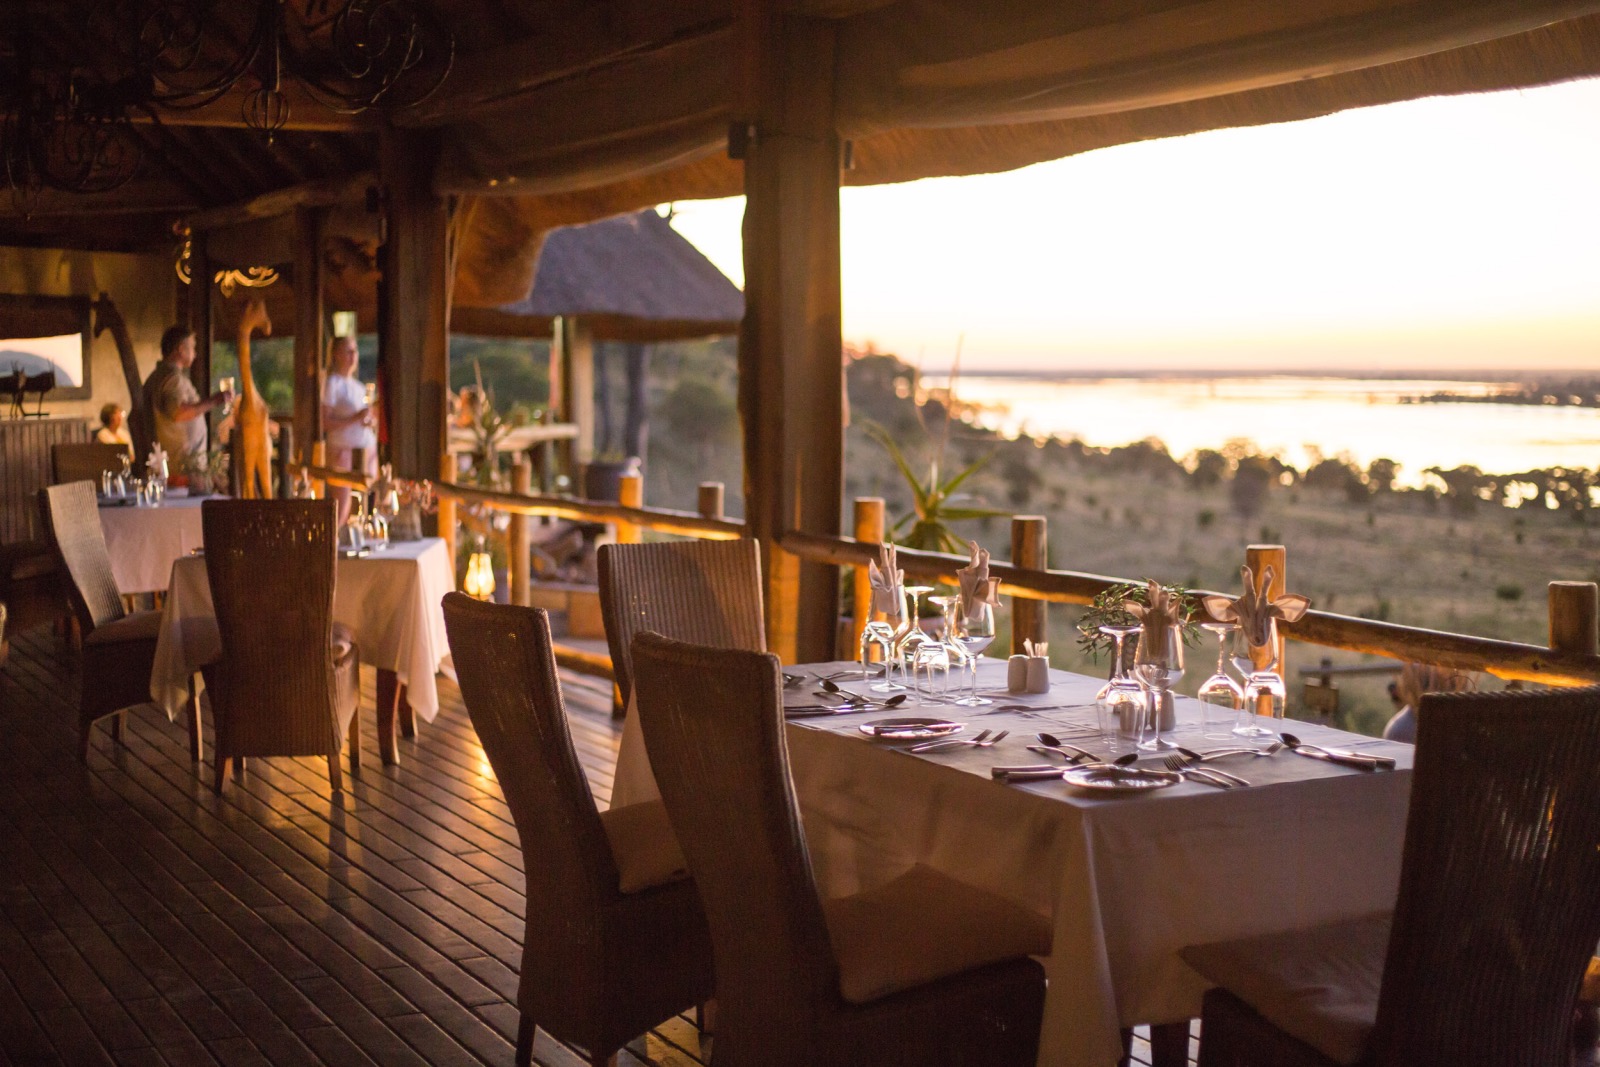 Dinners tables set and looking out onto a view of the Chobe River in Botswana